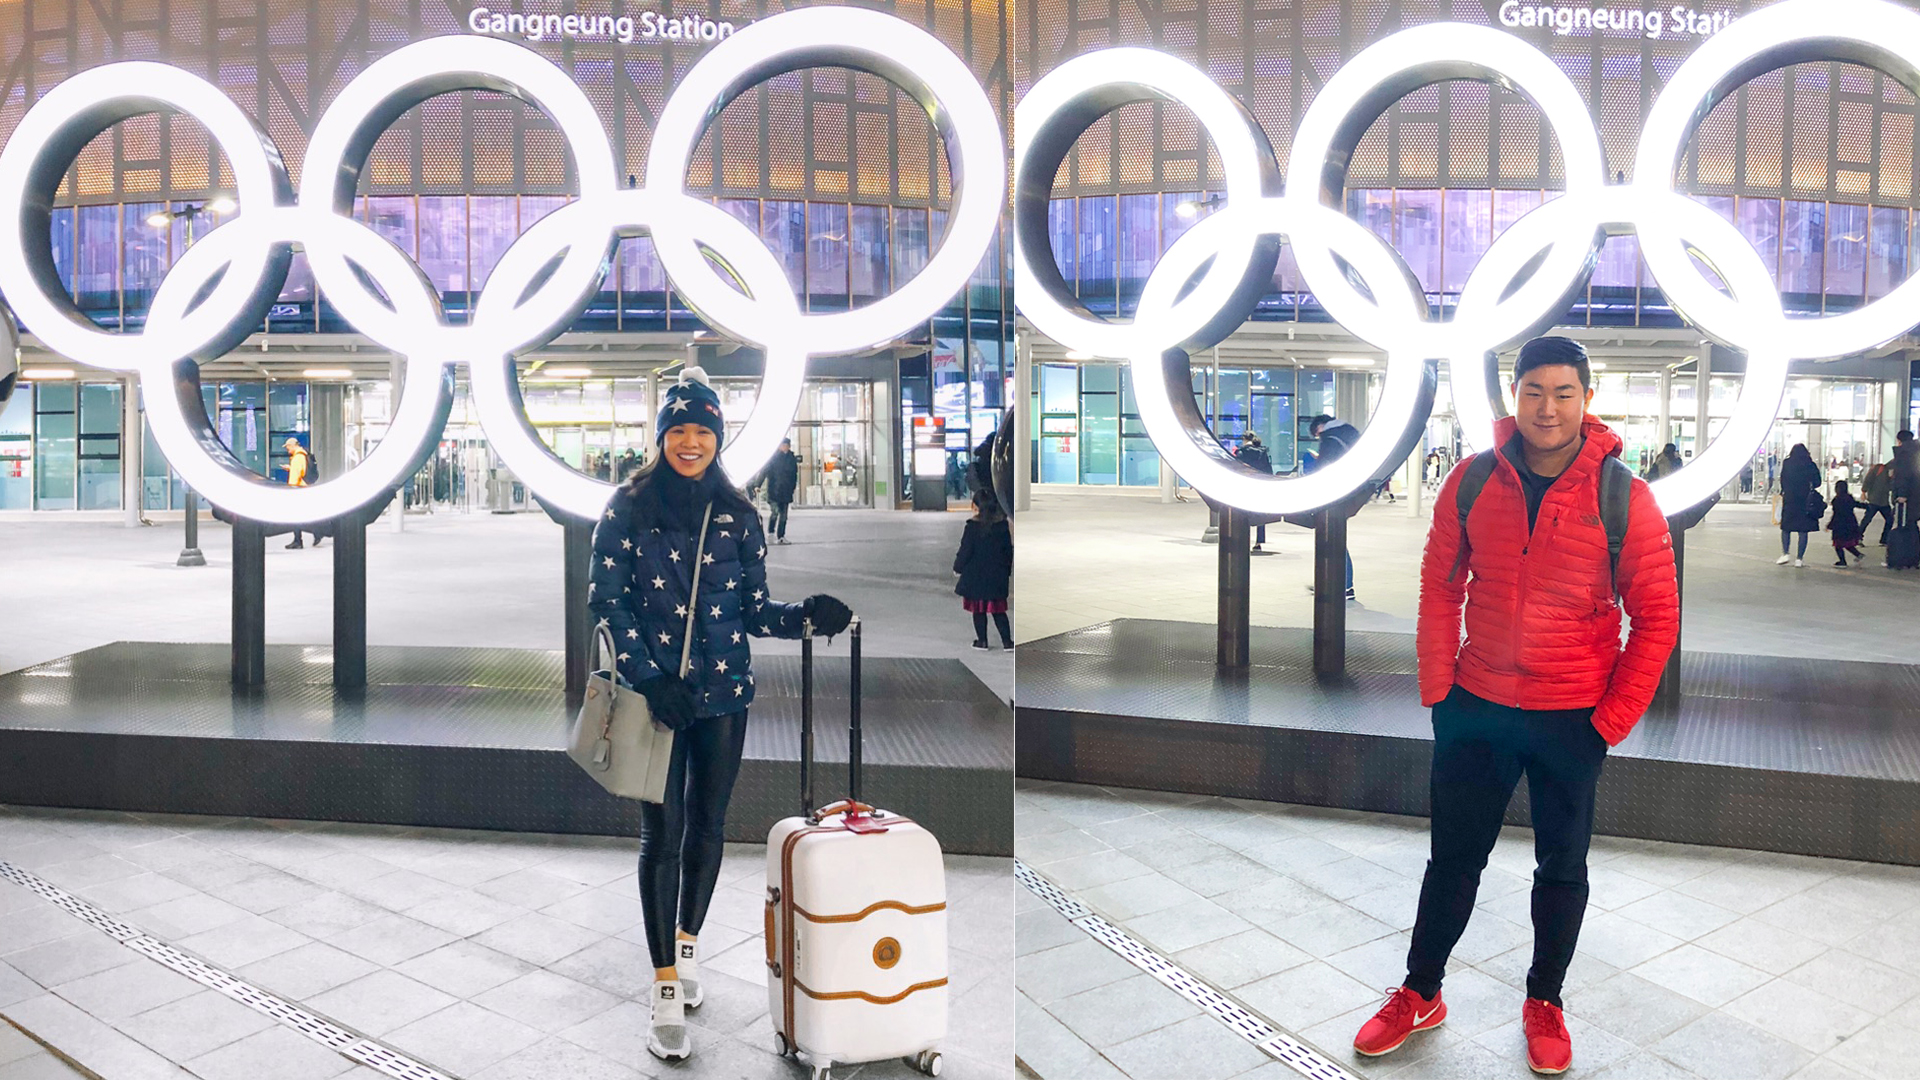 Blogger Hoang-Kim Cung and her boyfriend Johnny leaving the 2018 Winter Olympics